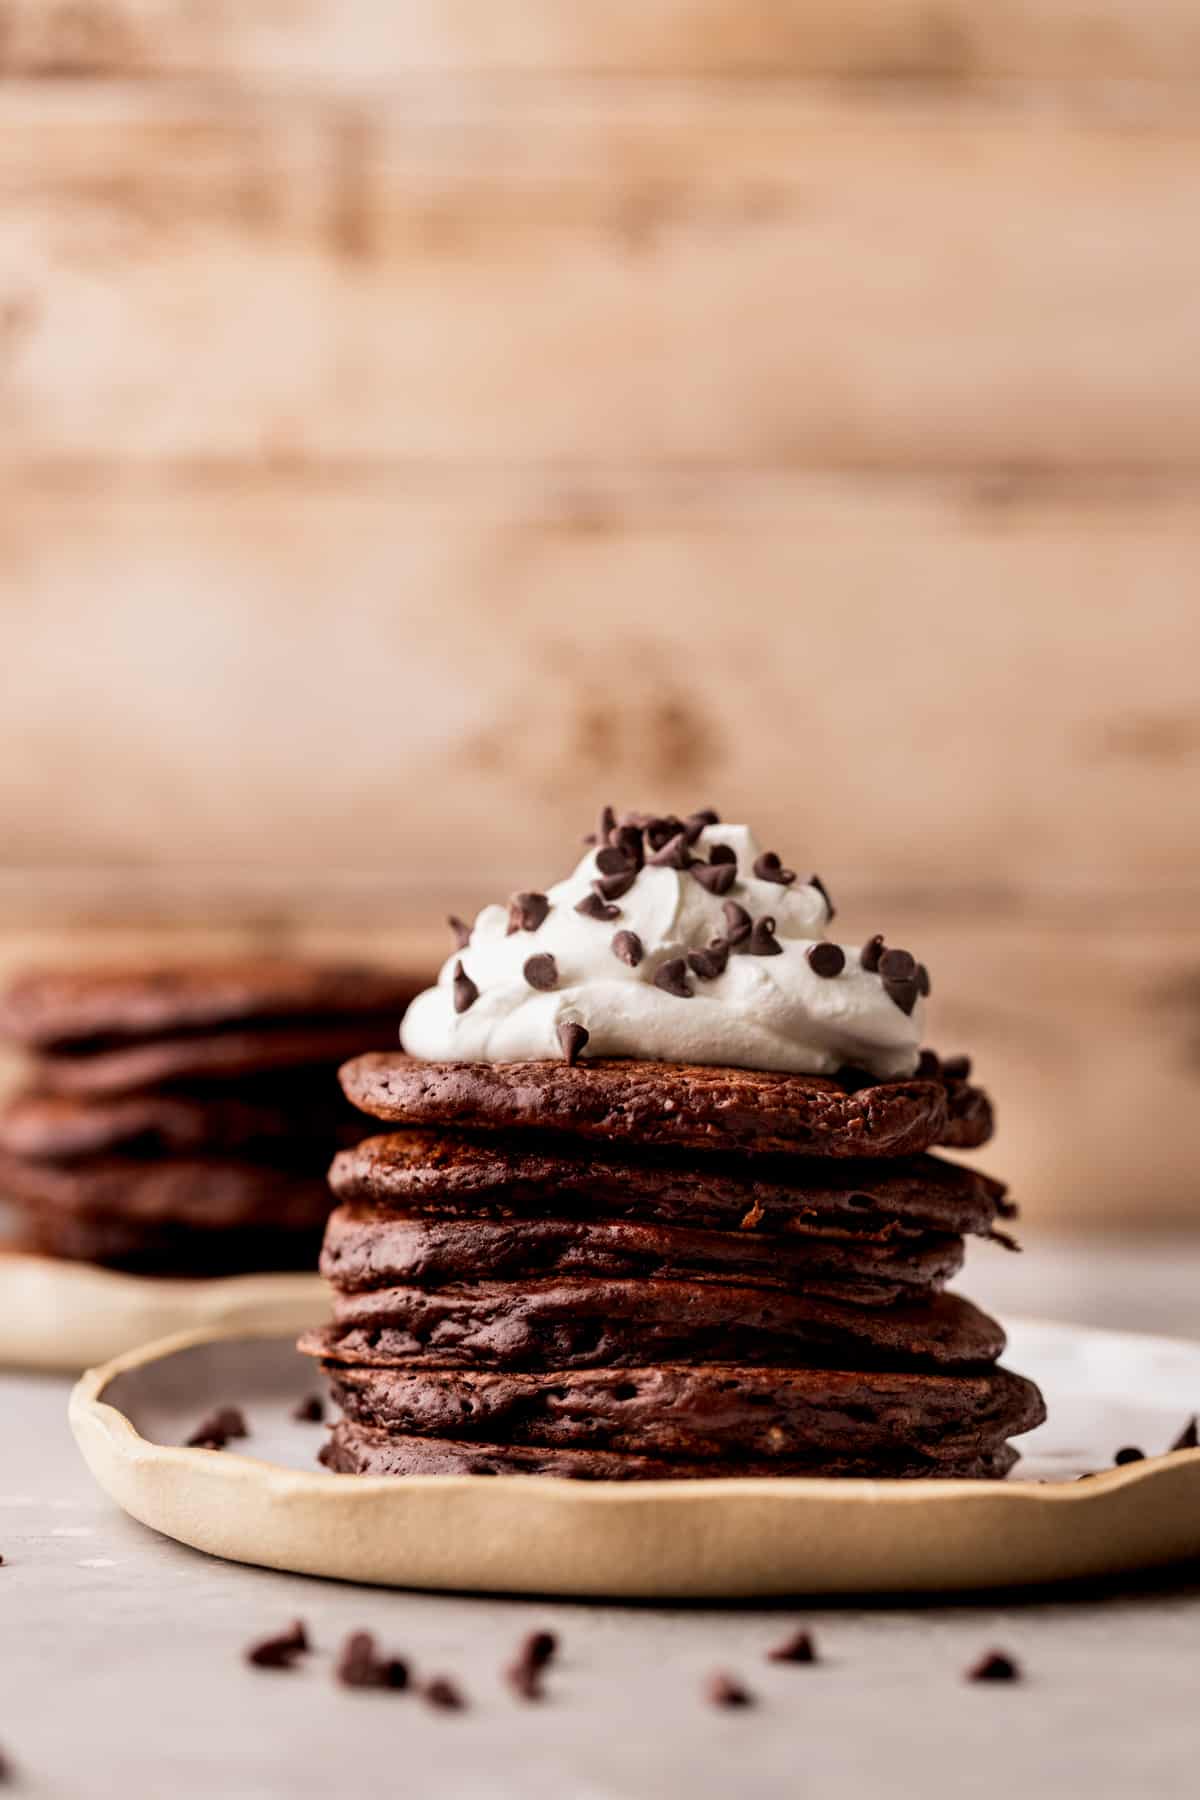 Stack of chocolate pancakes on a plate.